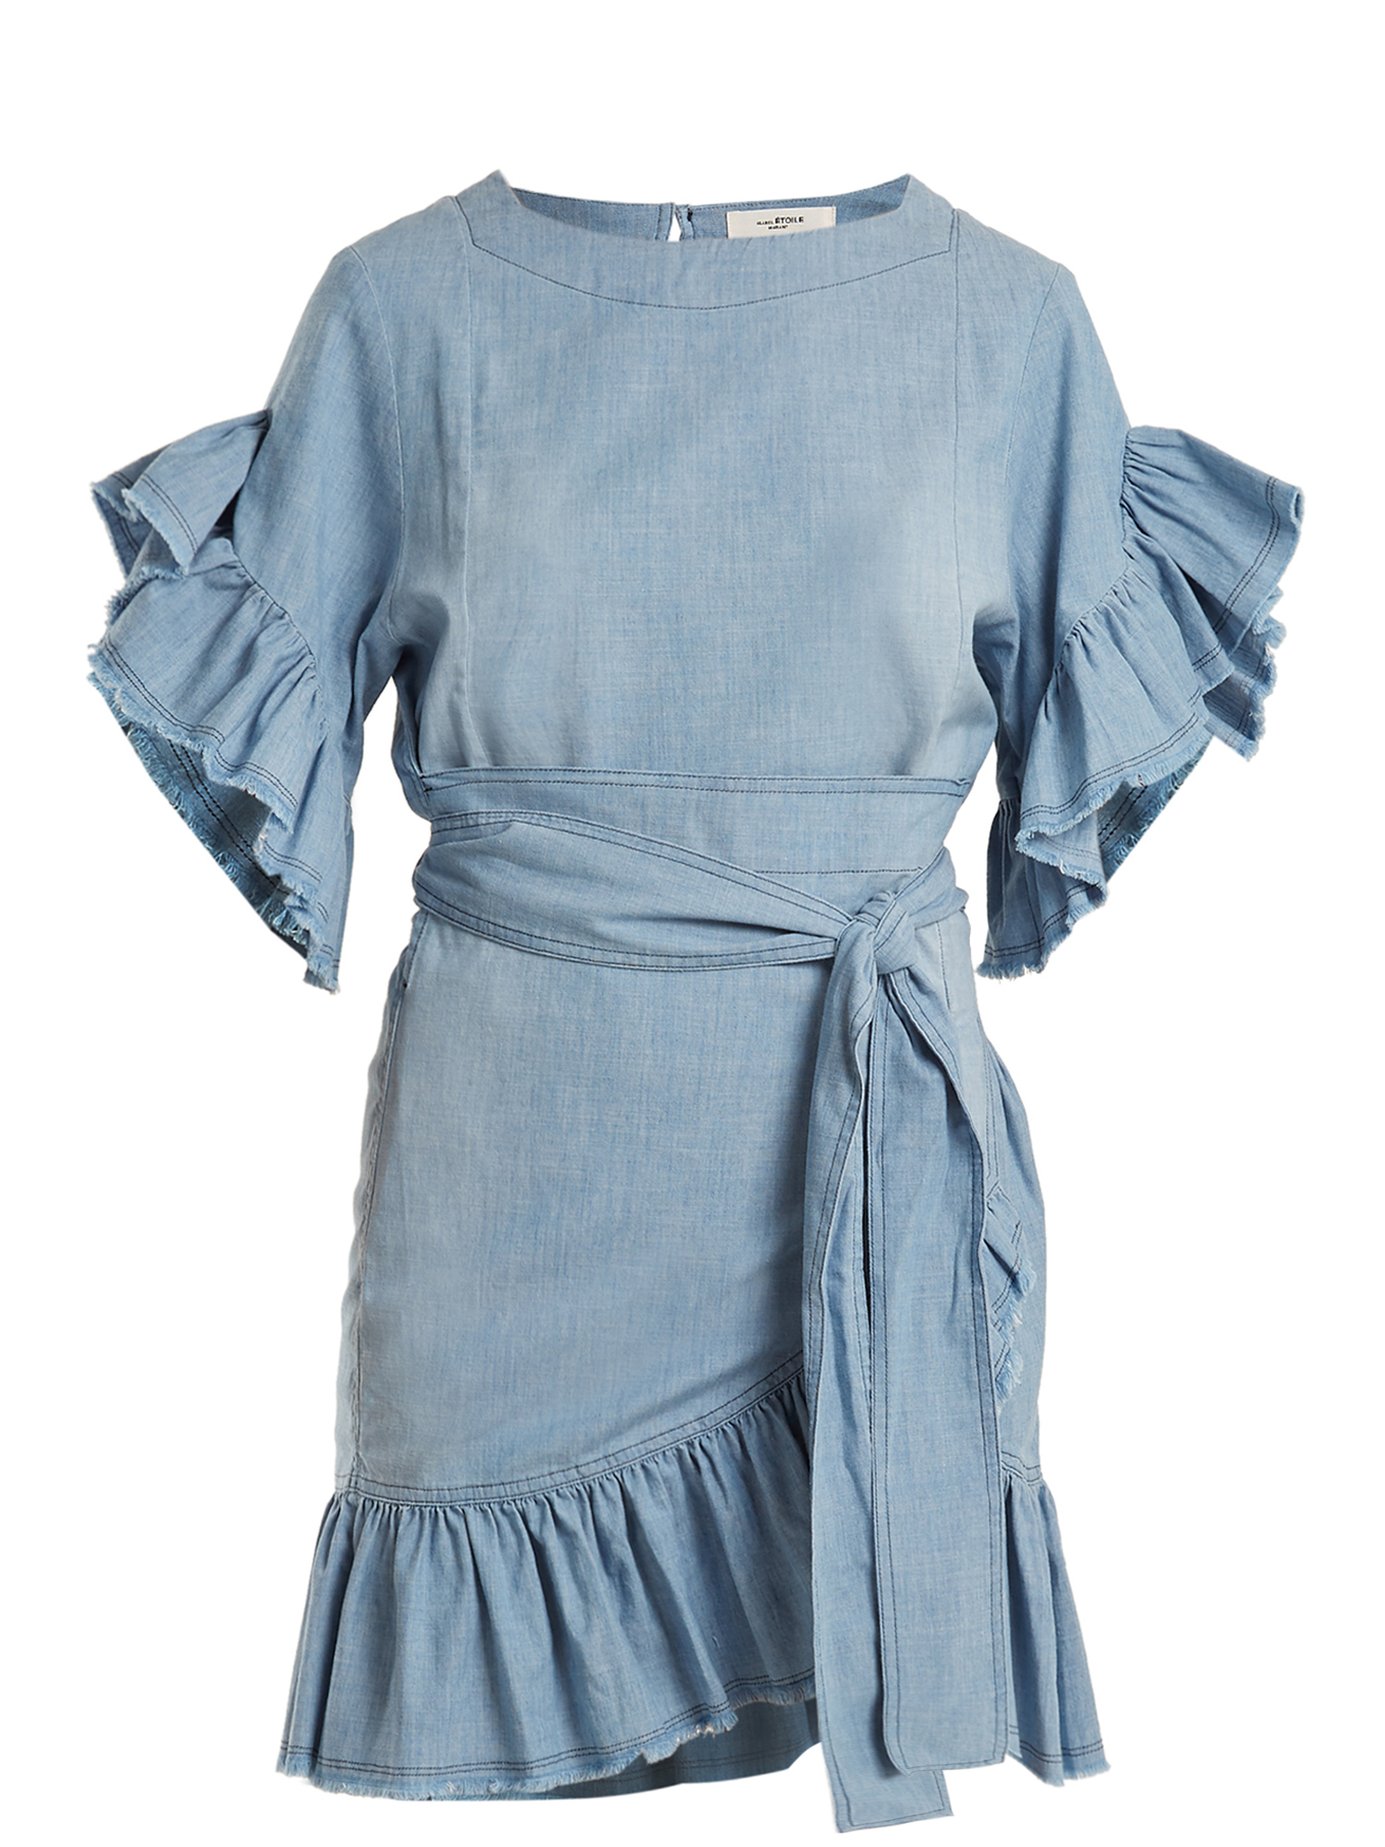 Isabel Marant Étoile - Lelicia Chambray Dress - Light Blue | ABOUT ICONS